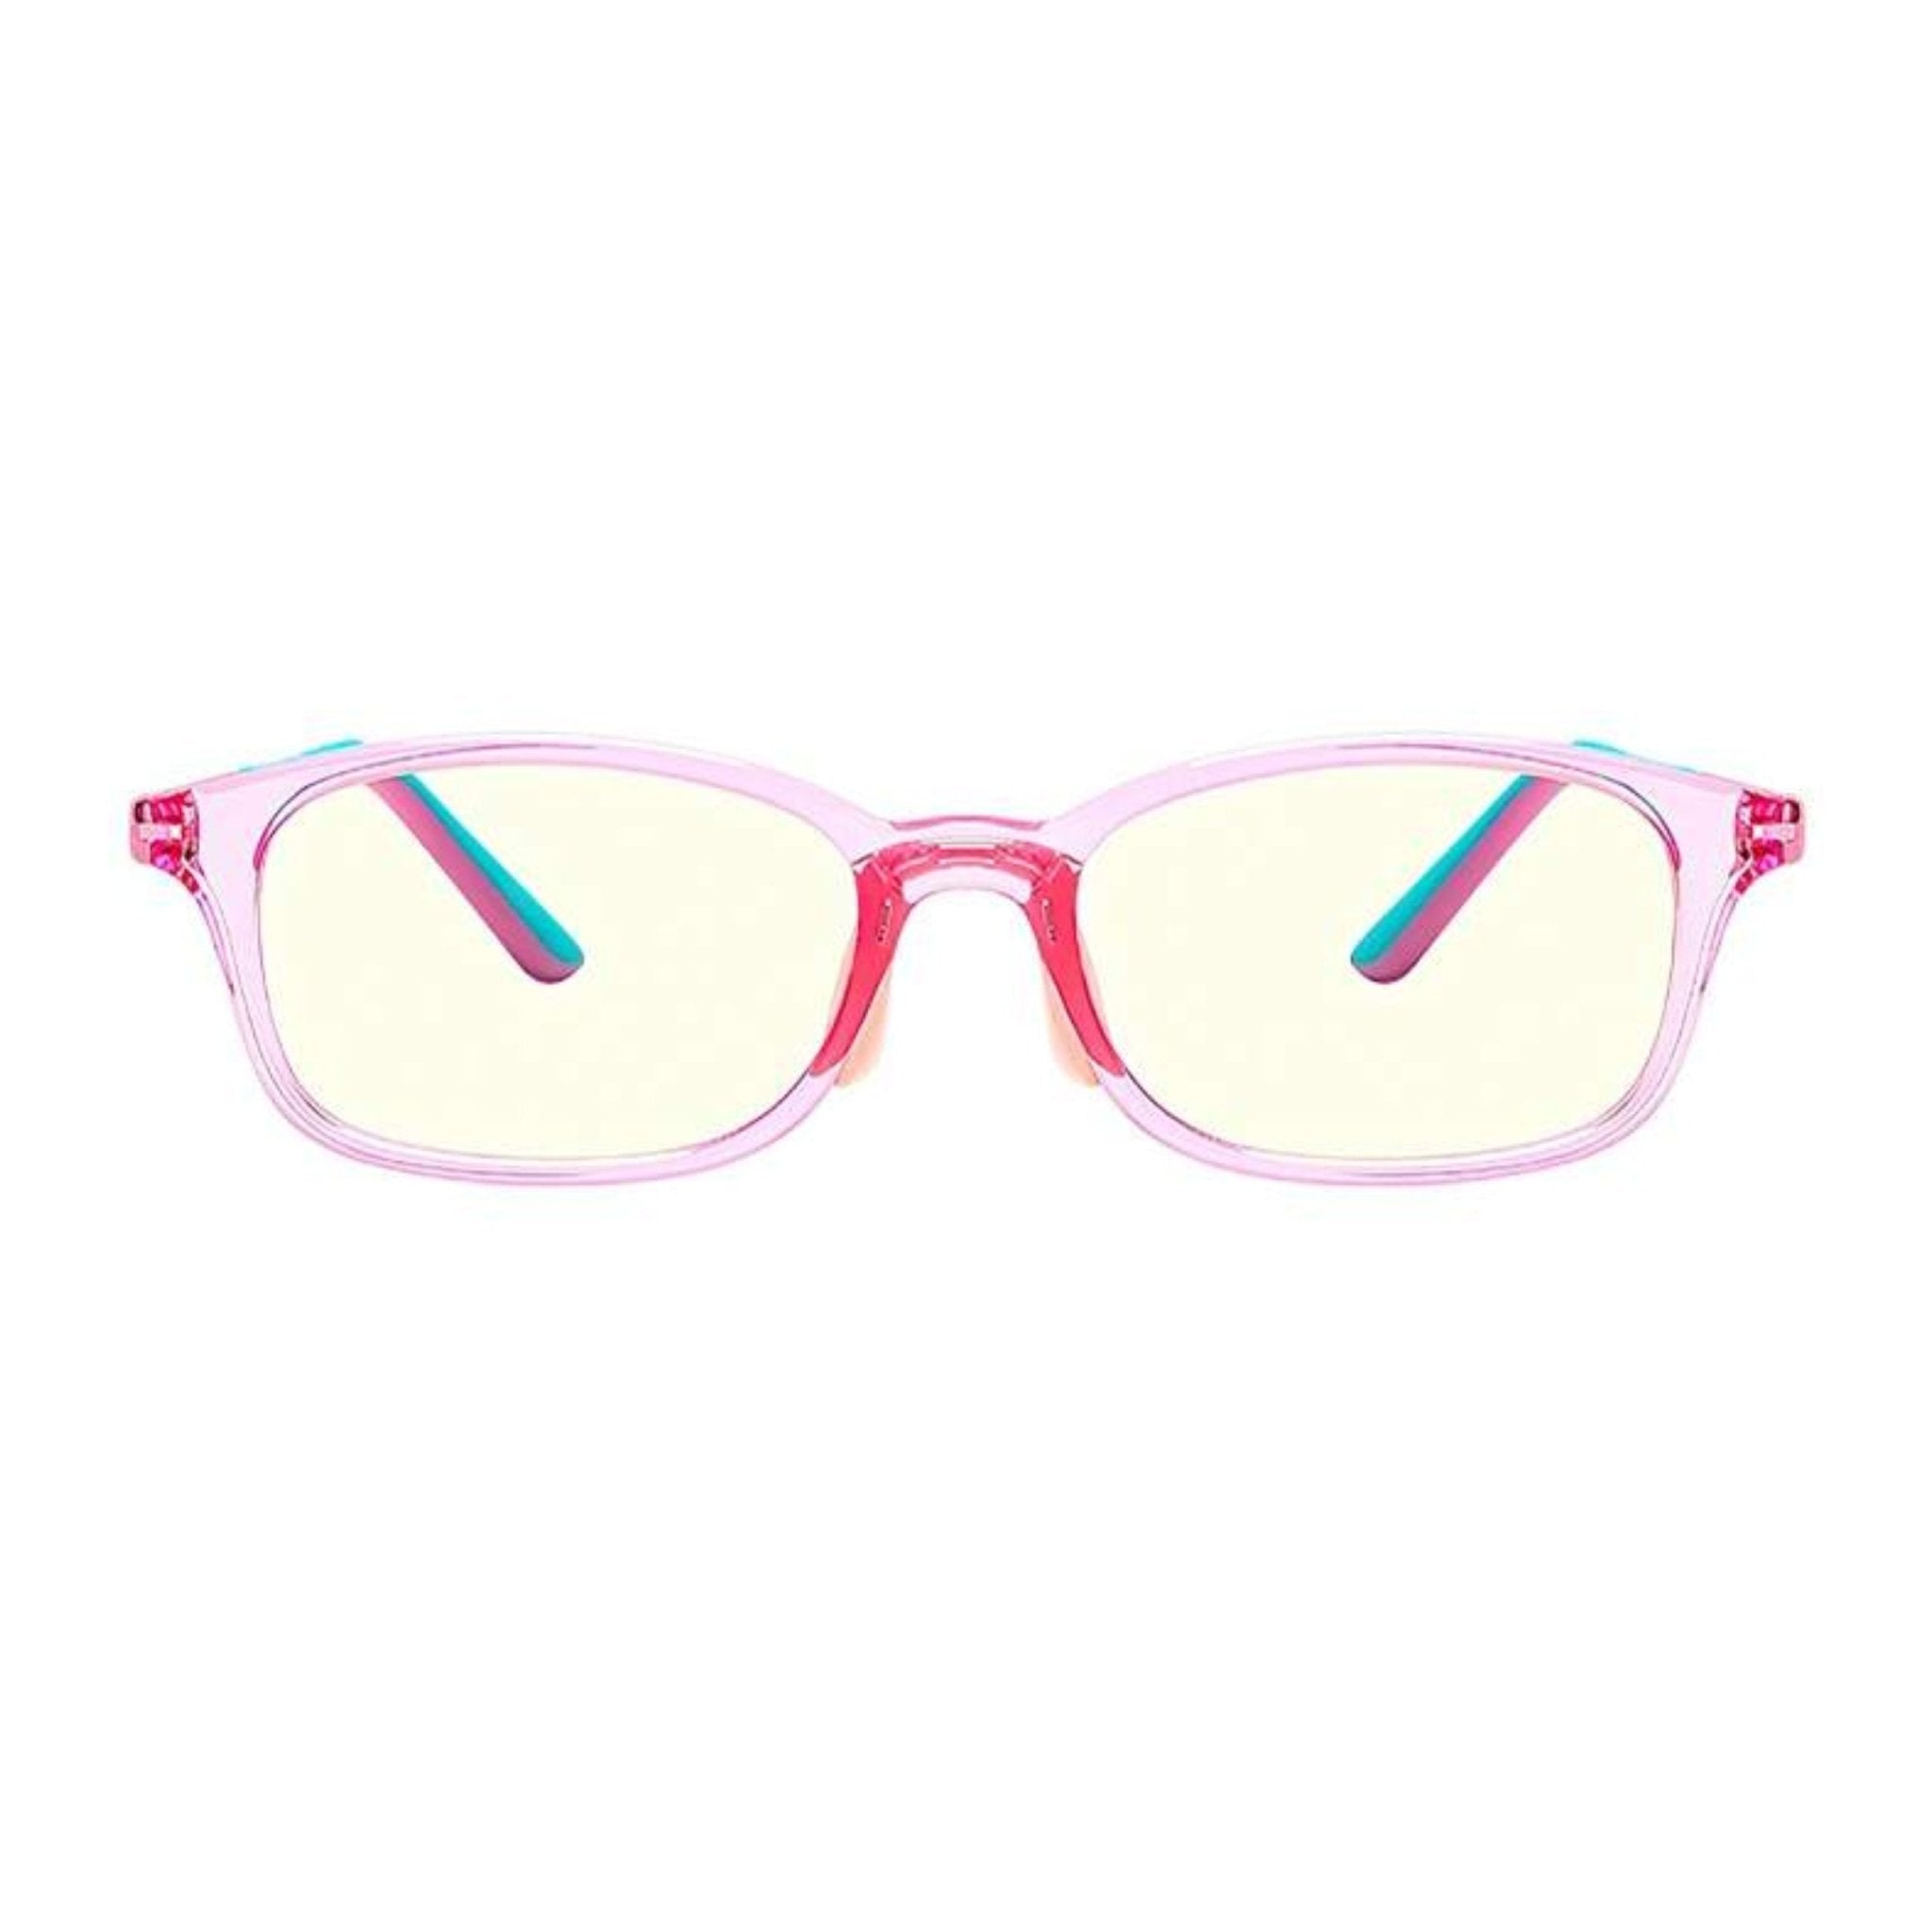 Mi Children Anti Blue Ray Protection Glasses - Pink Blue